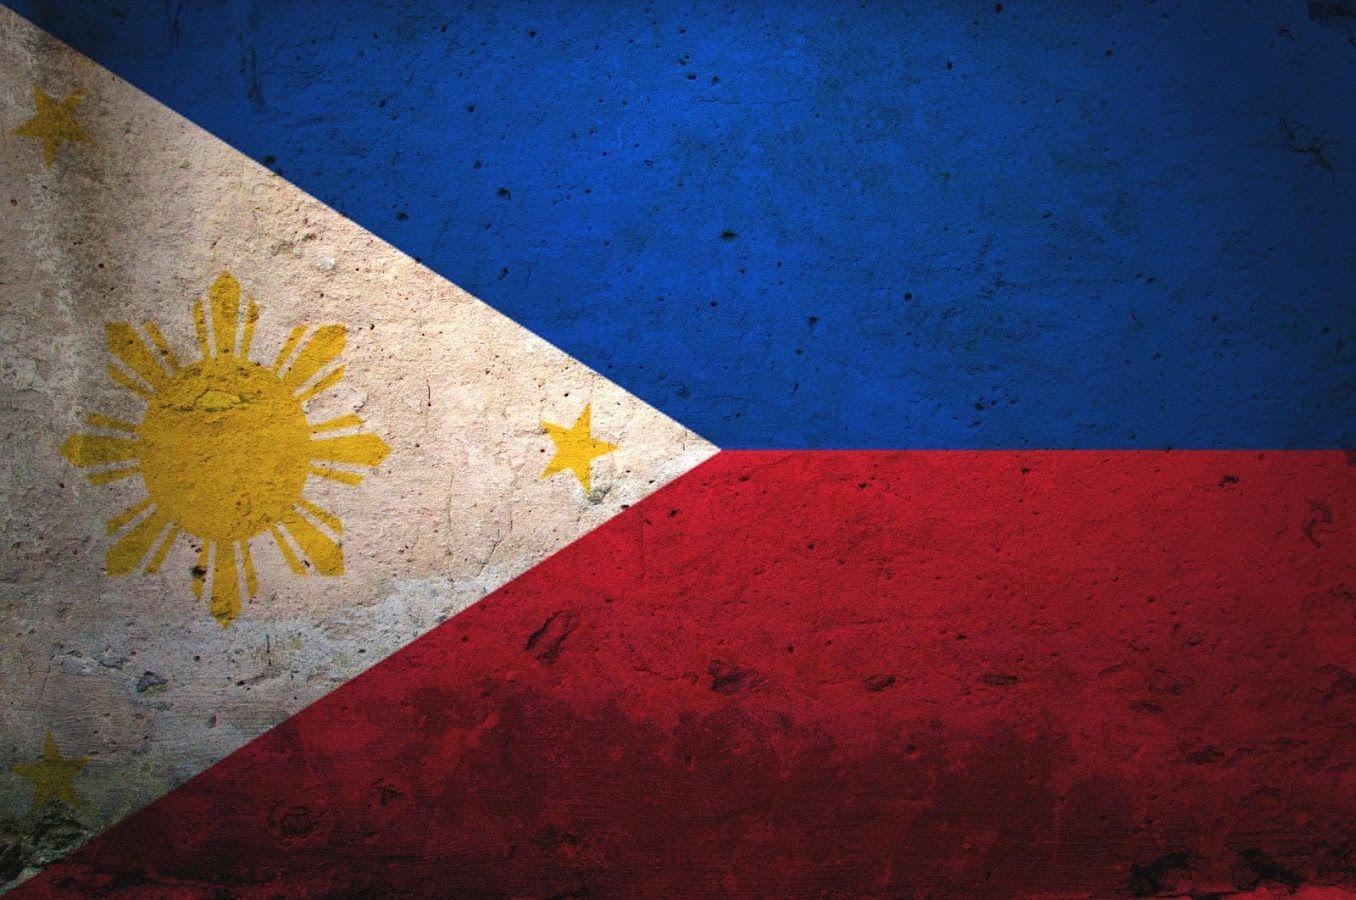 Philippines Flag Wallpaper Apps on Google Play